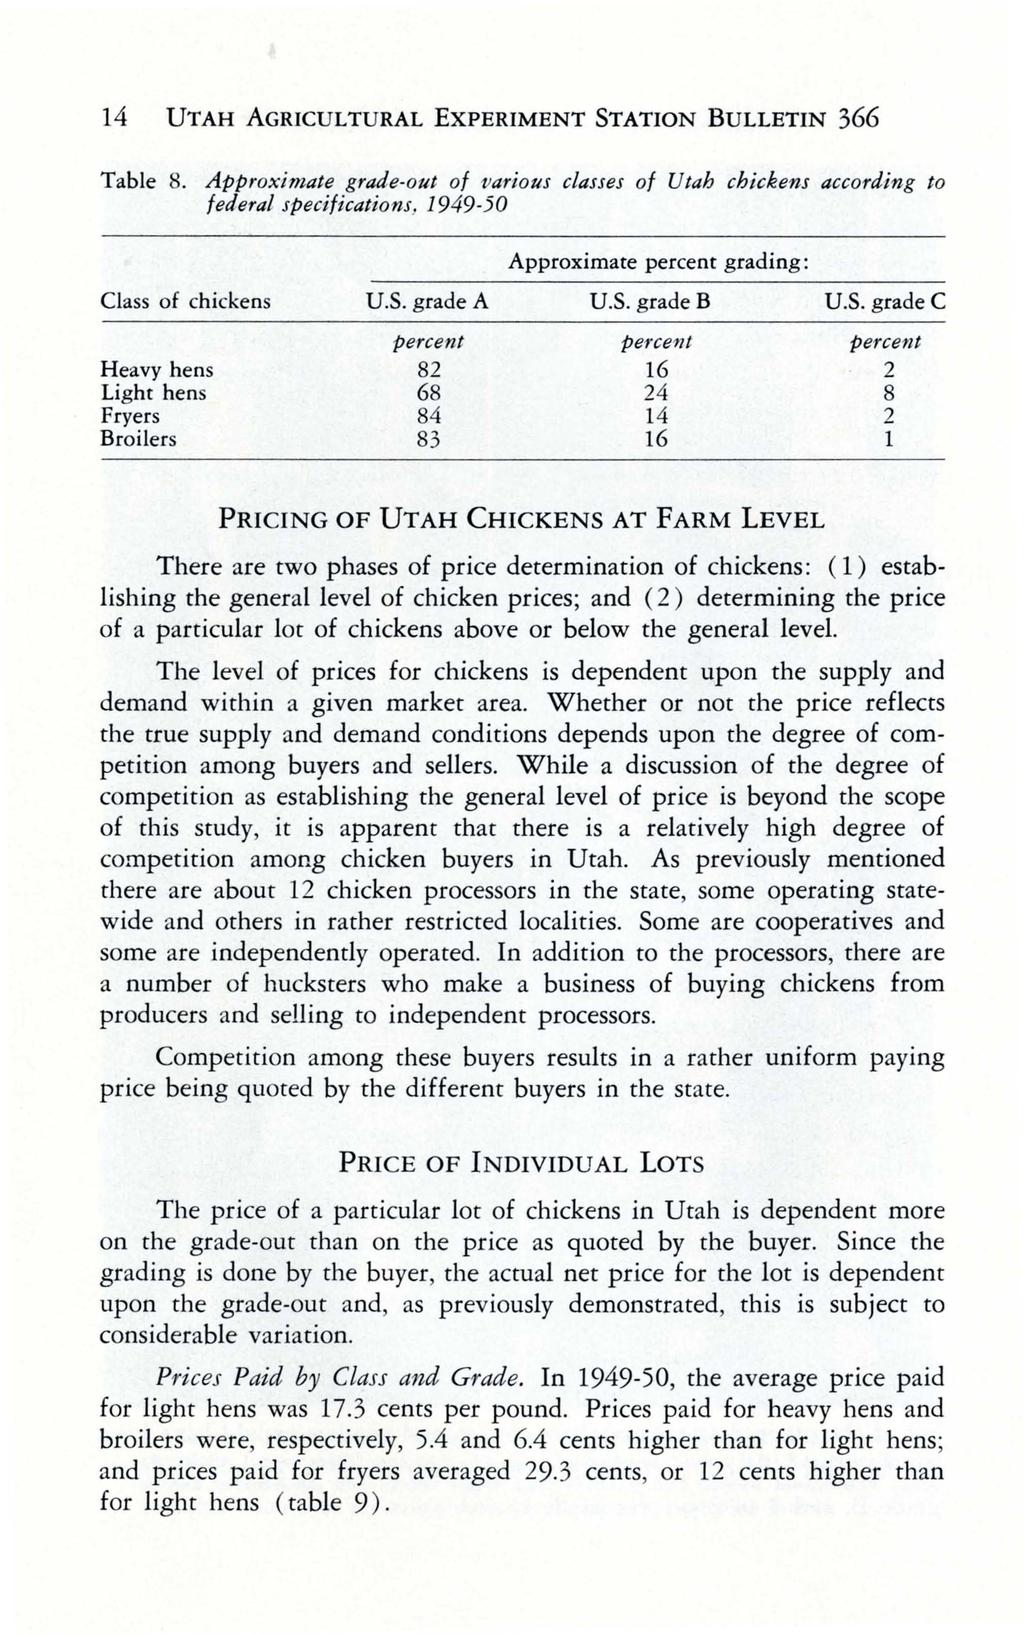 14 UTAH AGRICULTURAL EXPERIMENT STATION BULLETIN 366 Table 8. Approximate grade-out of va'rious classes of Utah chickens according to federal specifications, 1949-50 Class of chickens U.S. grade A Approximate grading: u.